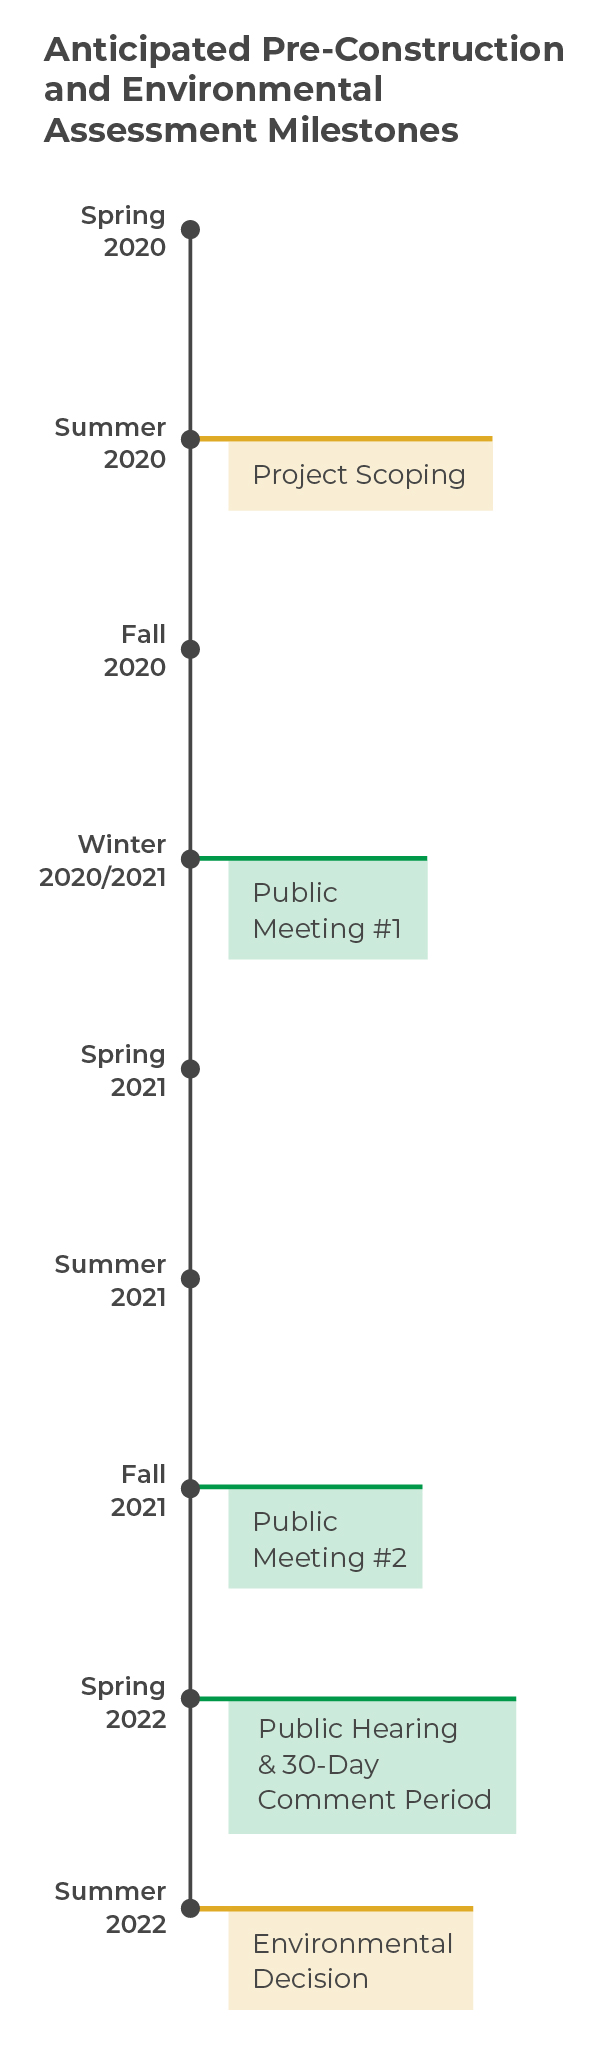 Timeline: Project scoping in September 2020, first public meeting in winter 2020/2021, second public meeting in fall 2021, public hearing and 30-day comment period in spring 2022, and an environmental decision in summer 2022.